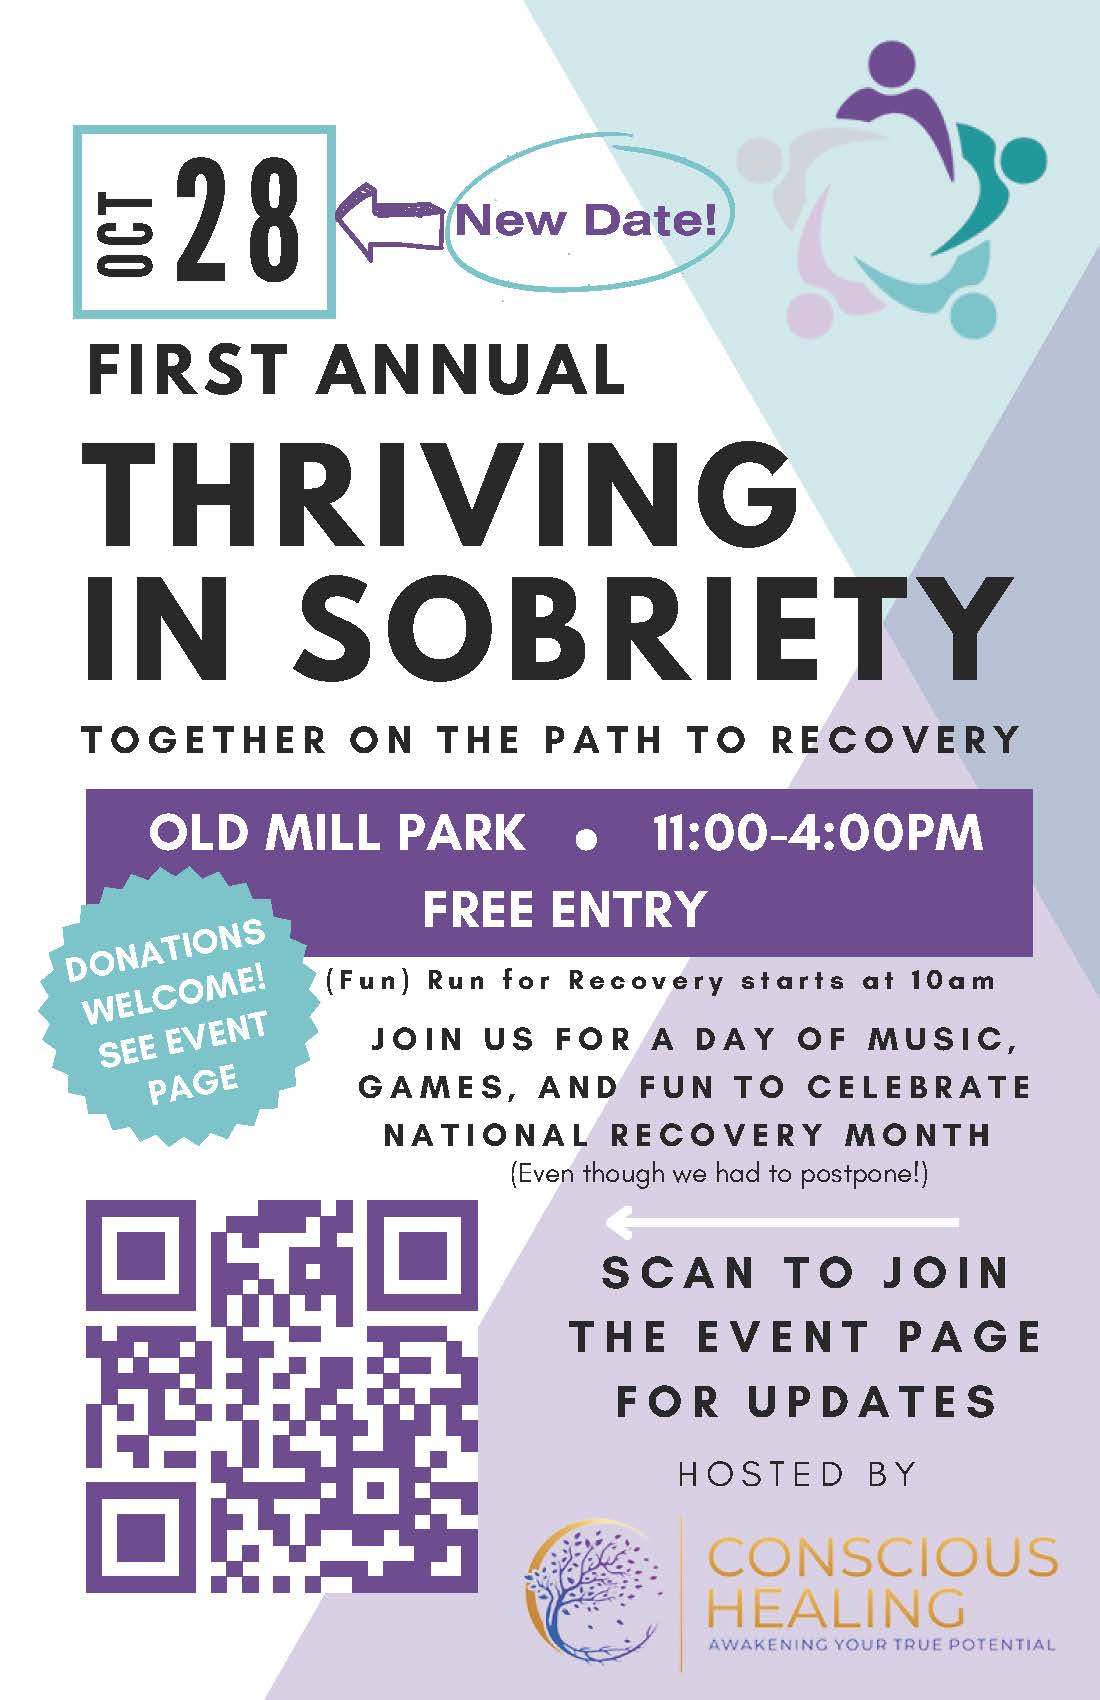 <h1 class="tribe-events-single-event-title">Thriving in Sobriety</h1>